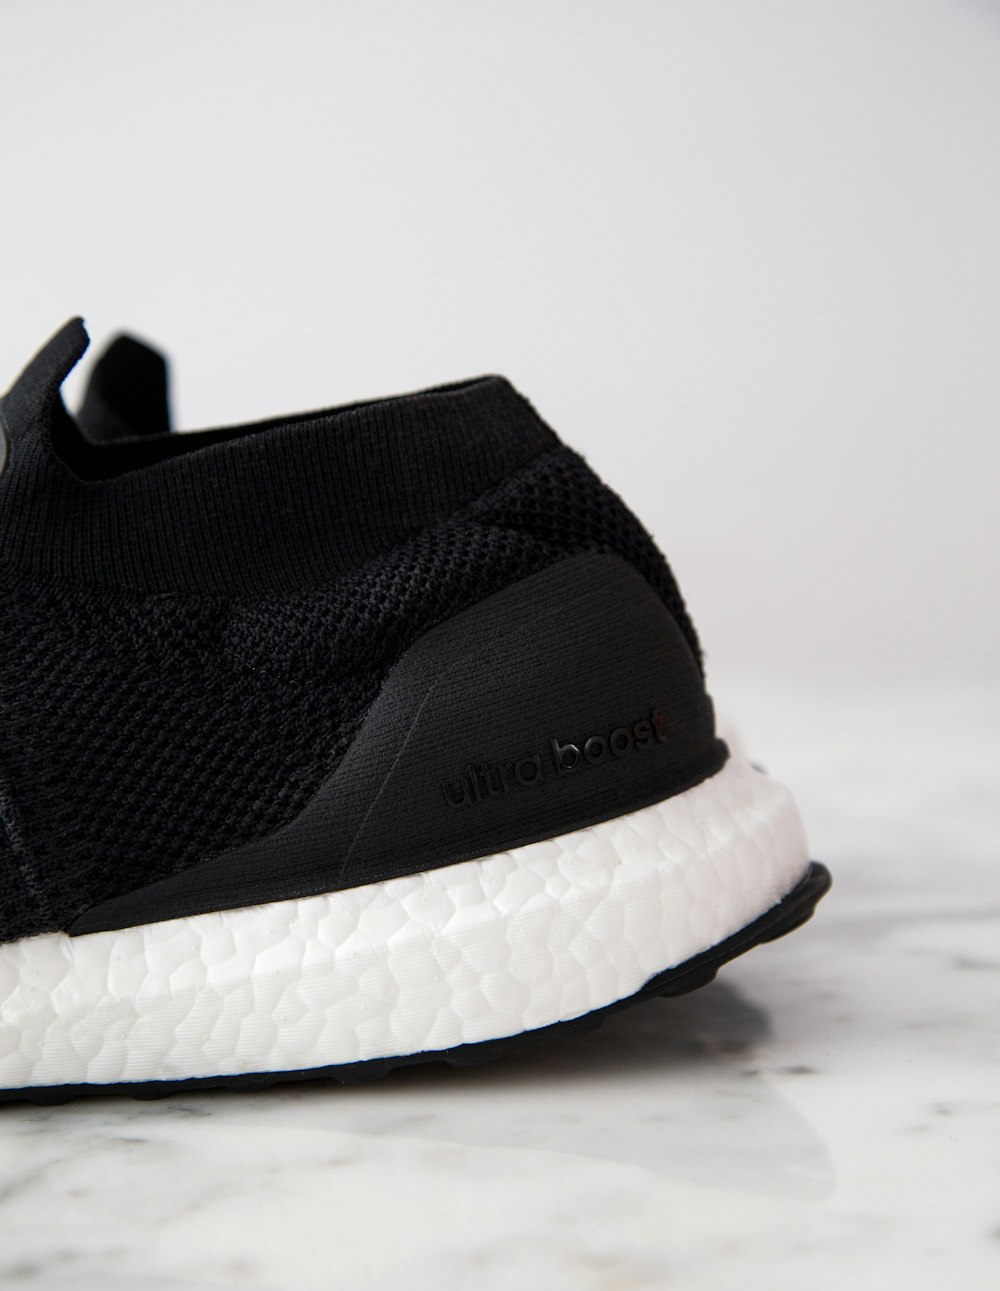 black and white adidas UltraBOOST shoe